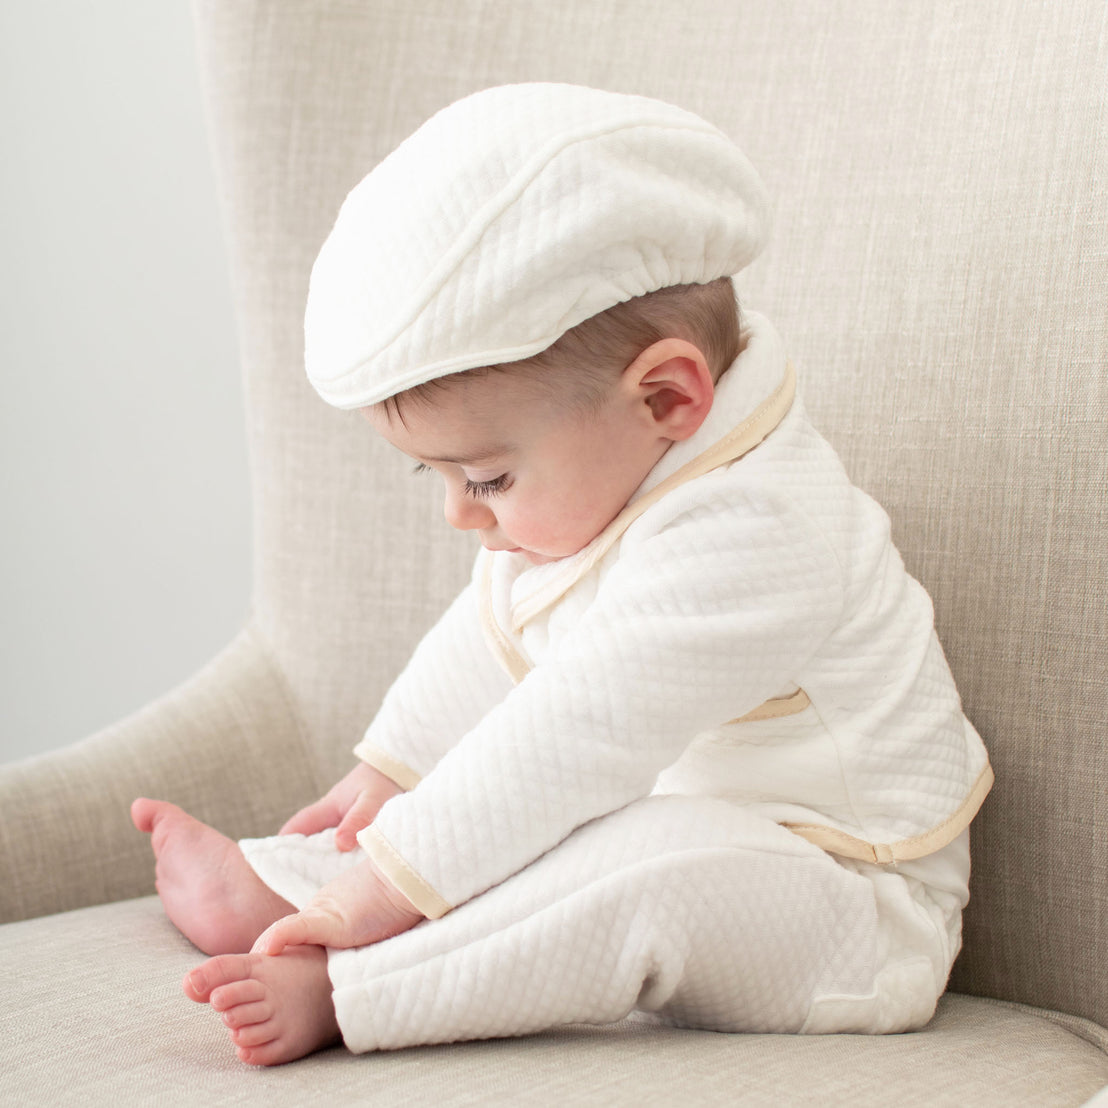 Baby boy sitting on a chair. He is wearing the Liam 3-Piece Suit and matching White Quilted Newsboy Cap